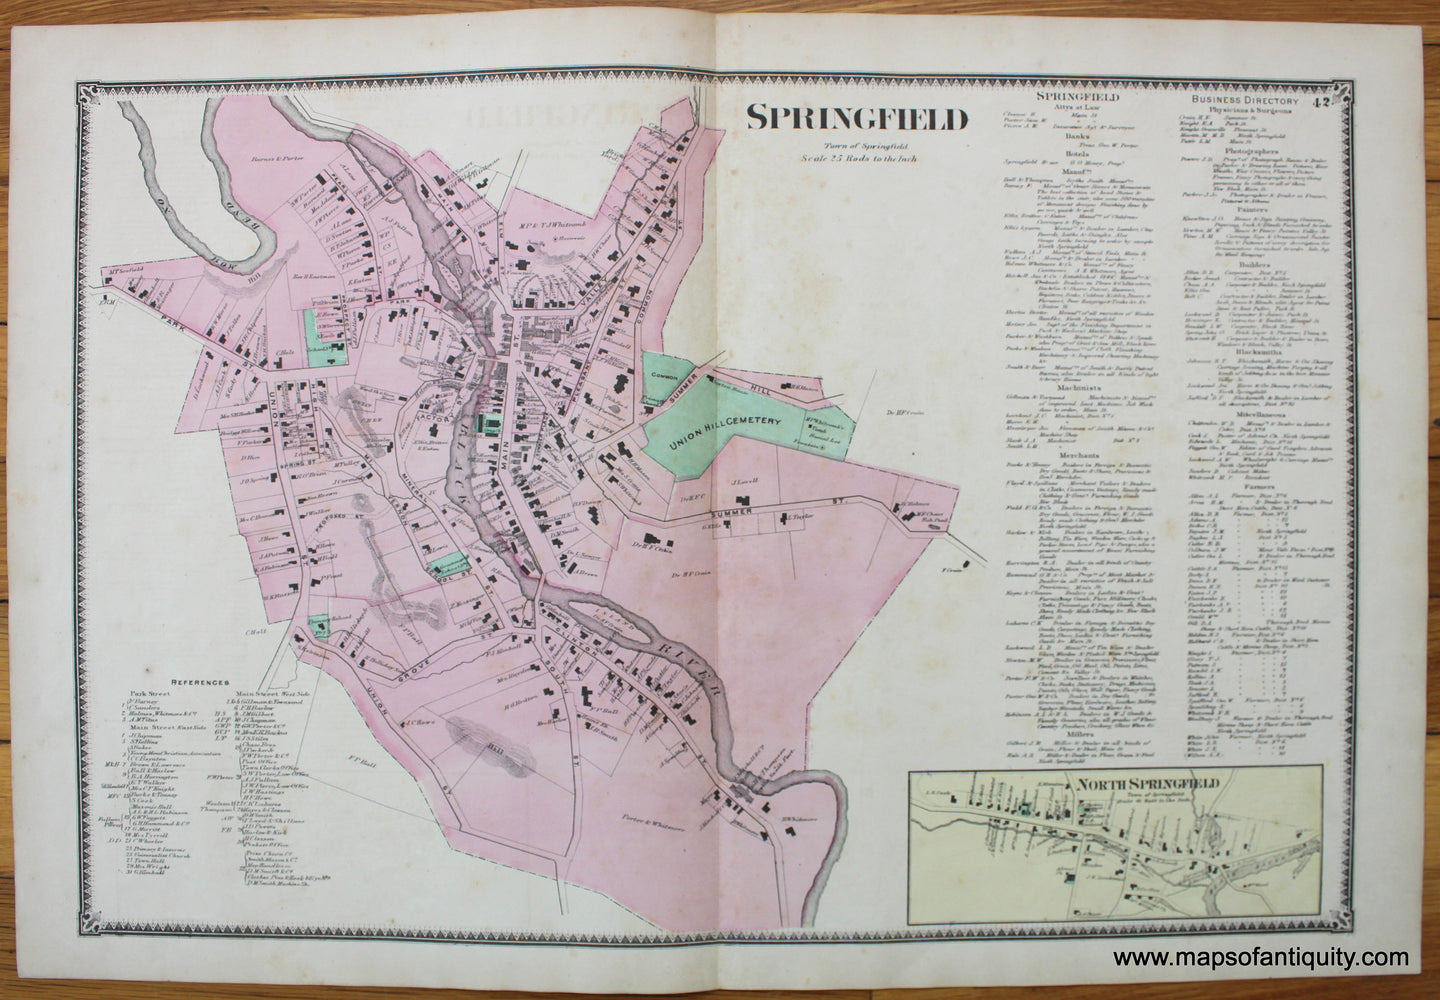 Genuine-Antique-Hand-colored-Map-Springfield-VT-Vermont-1869-Beers-Maps-Of-Antiquity